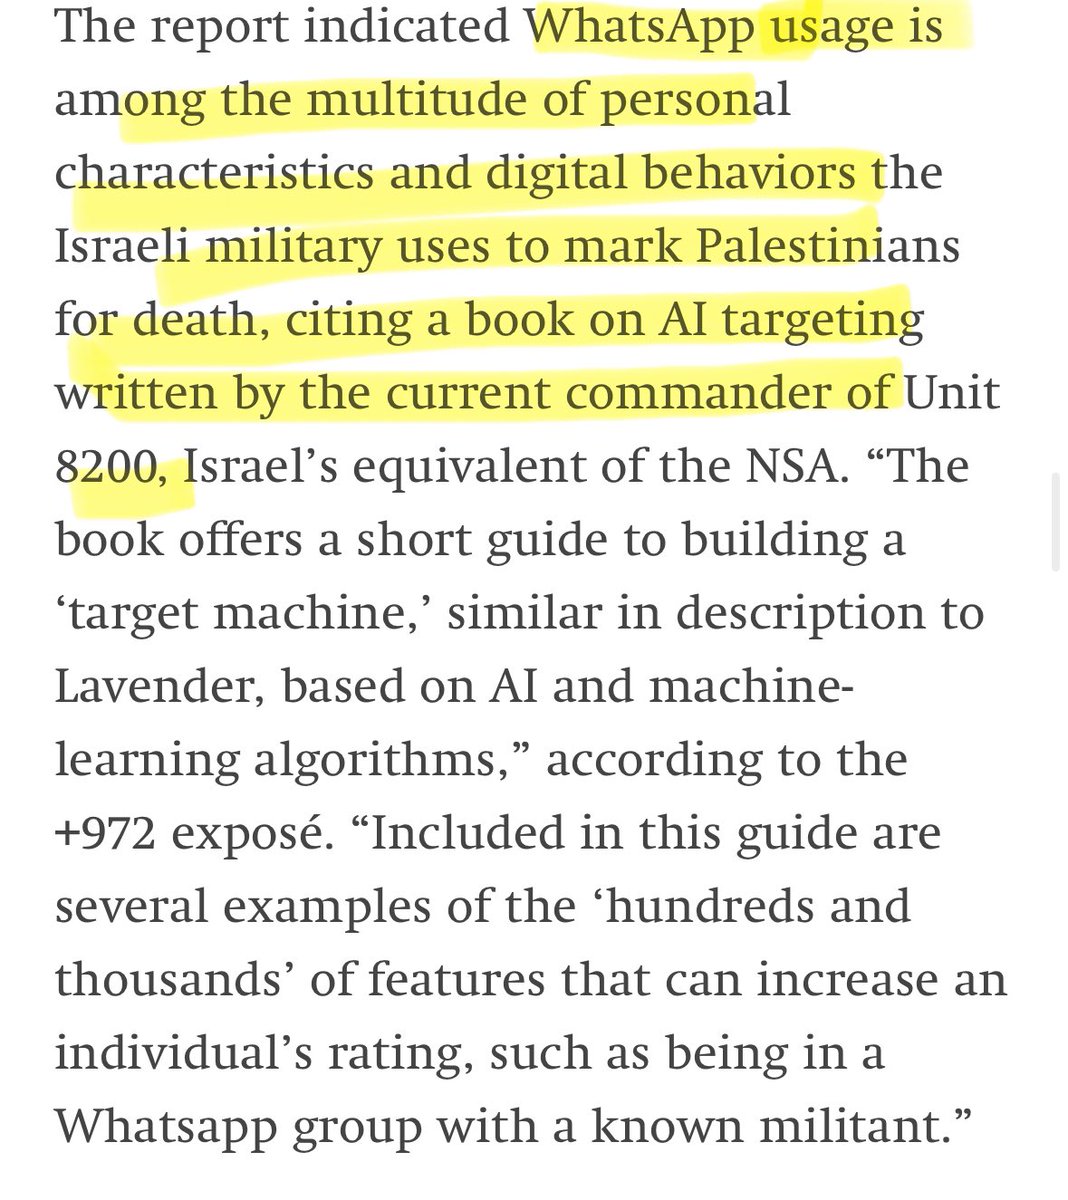 Disturbing reporting about a story that has only worsened in recent years: the way commonplace technology and platforms we use on a day-to-day basis are used to surveil, criminalize, target and kill people - specifically, in this case, Palestinians.